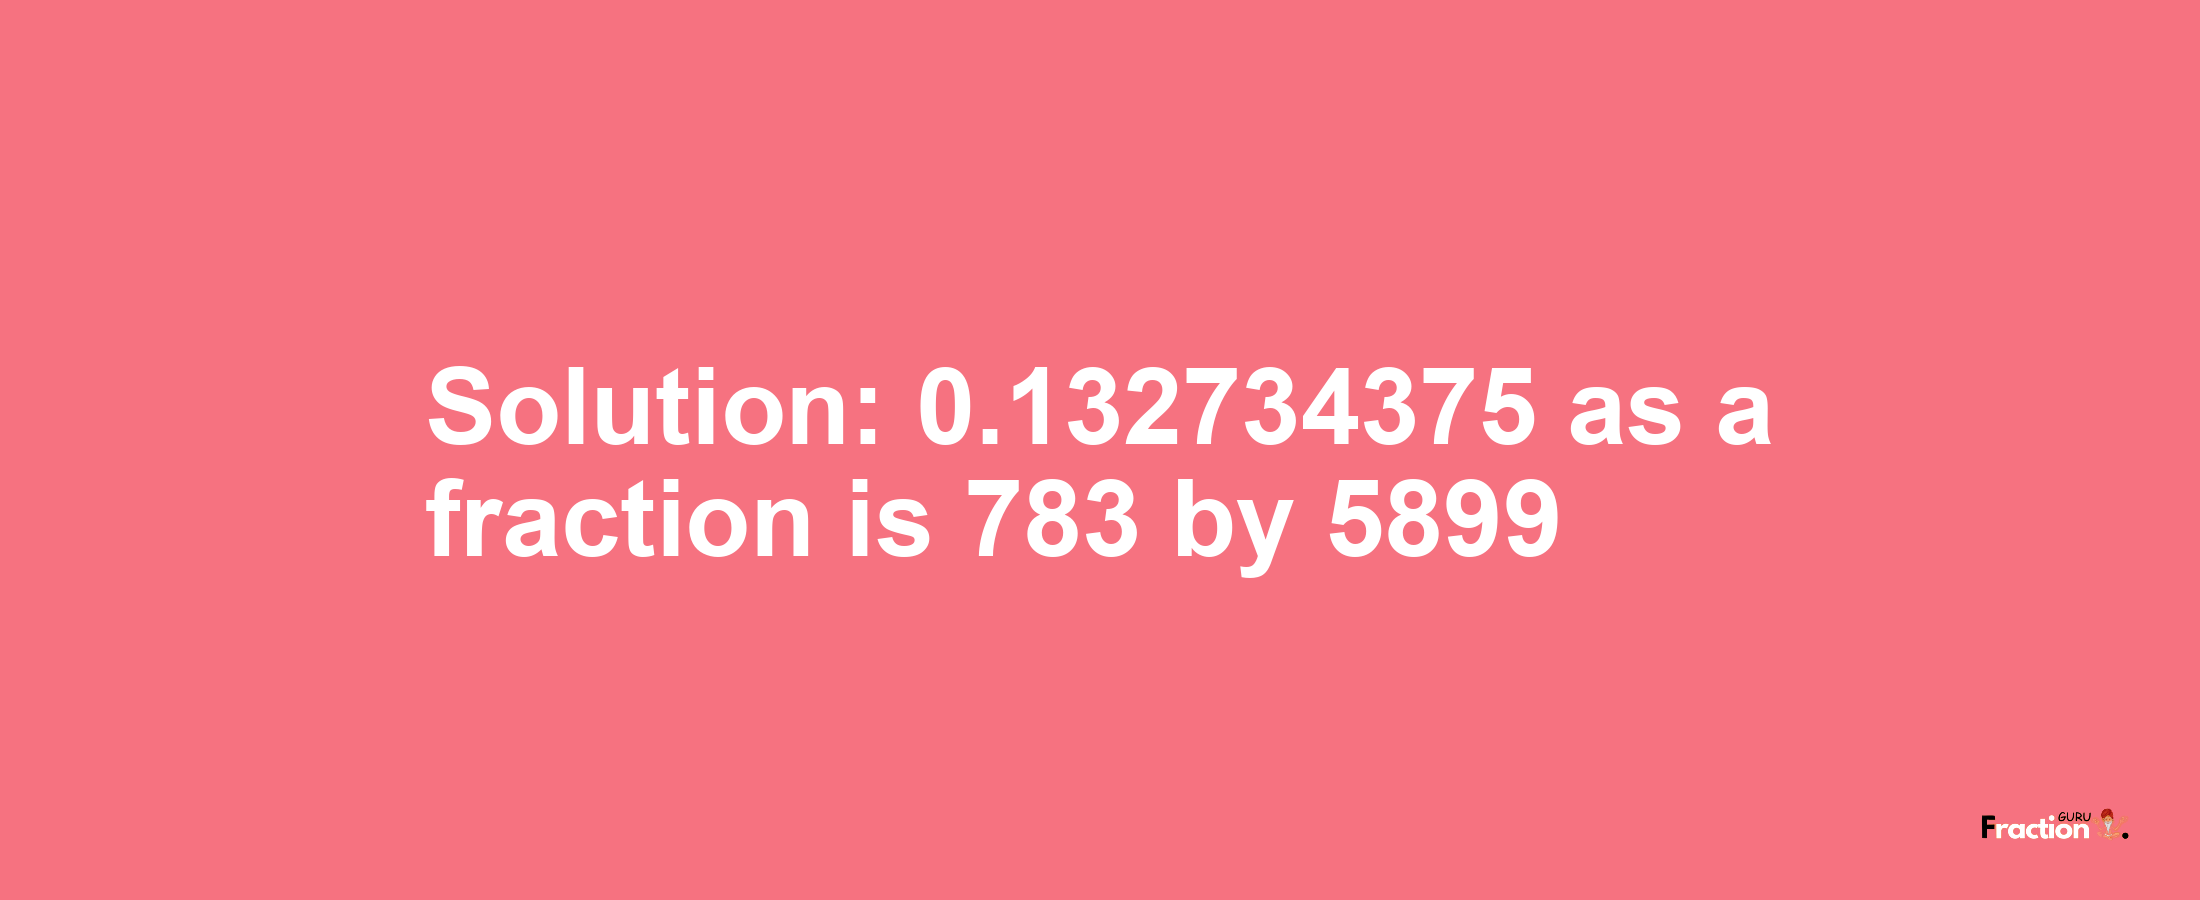 Solution:0.132734375 as a fraction is 783/5899